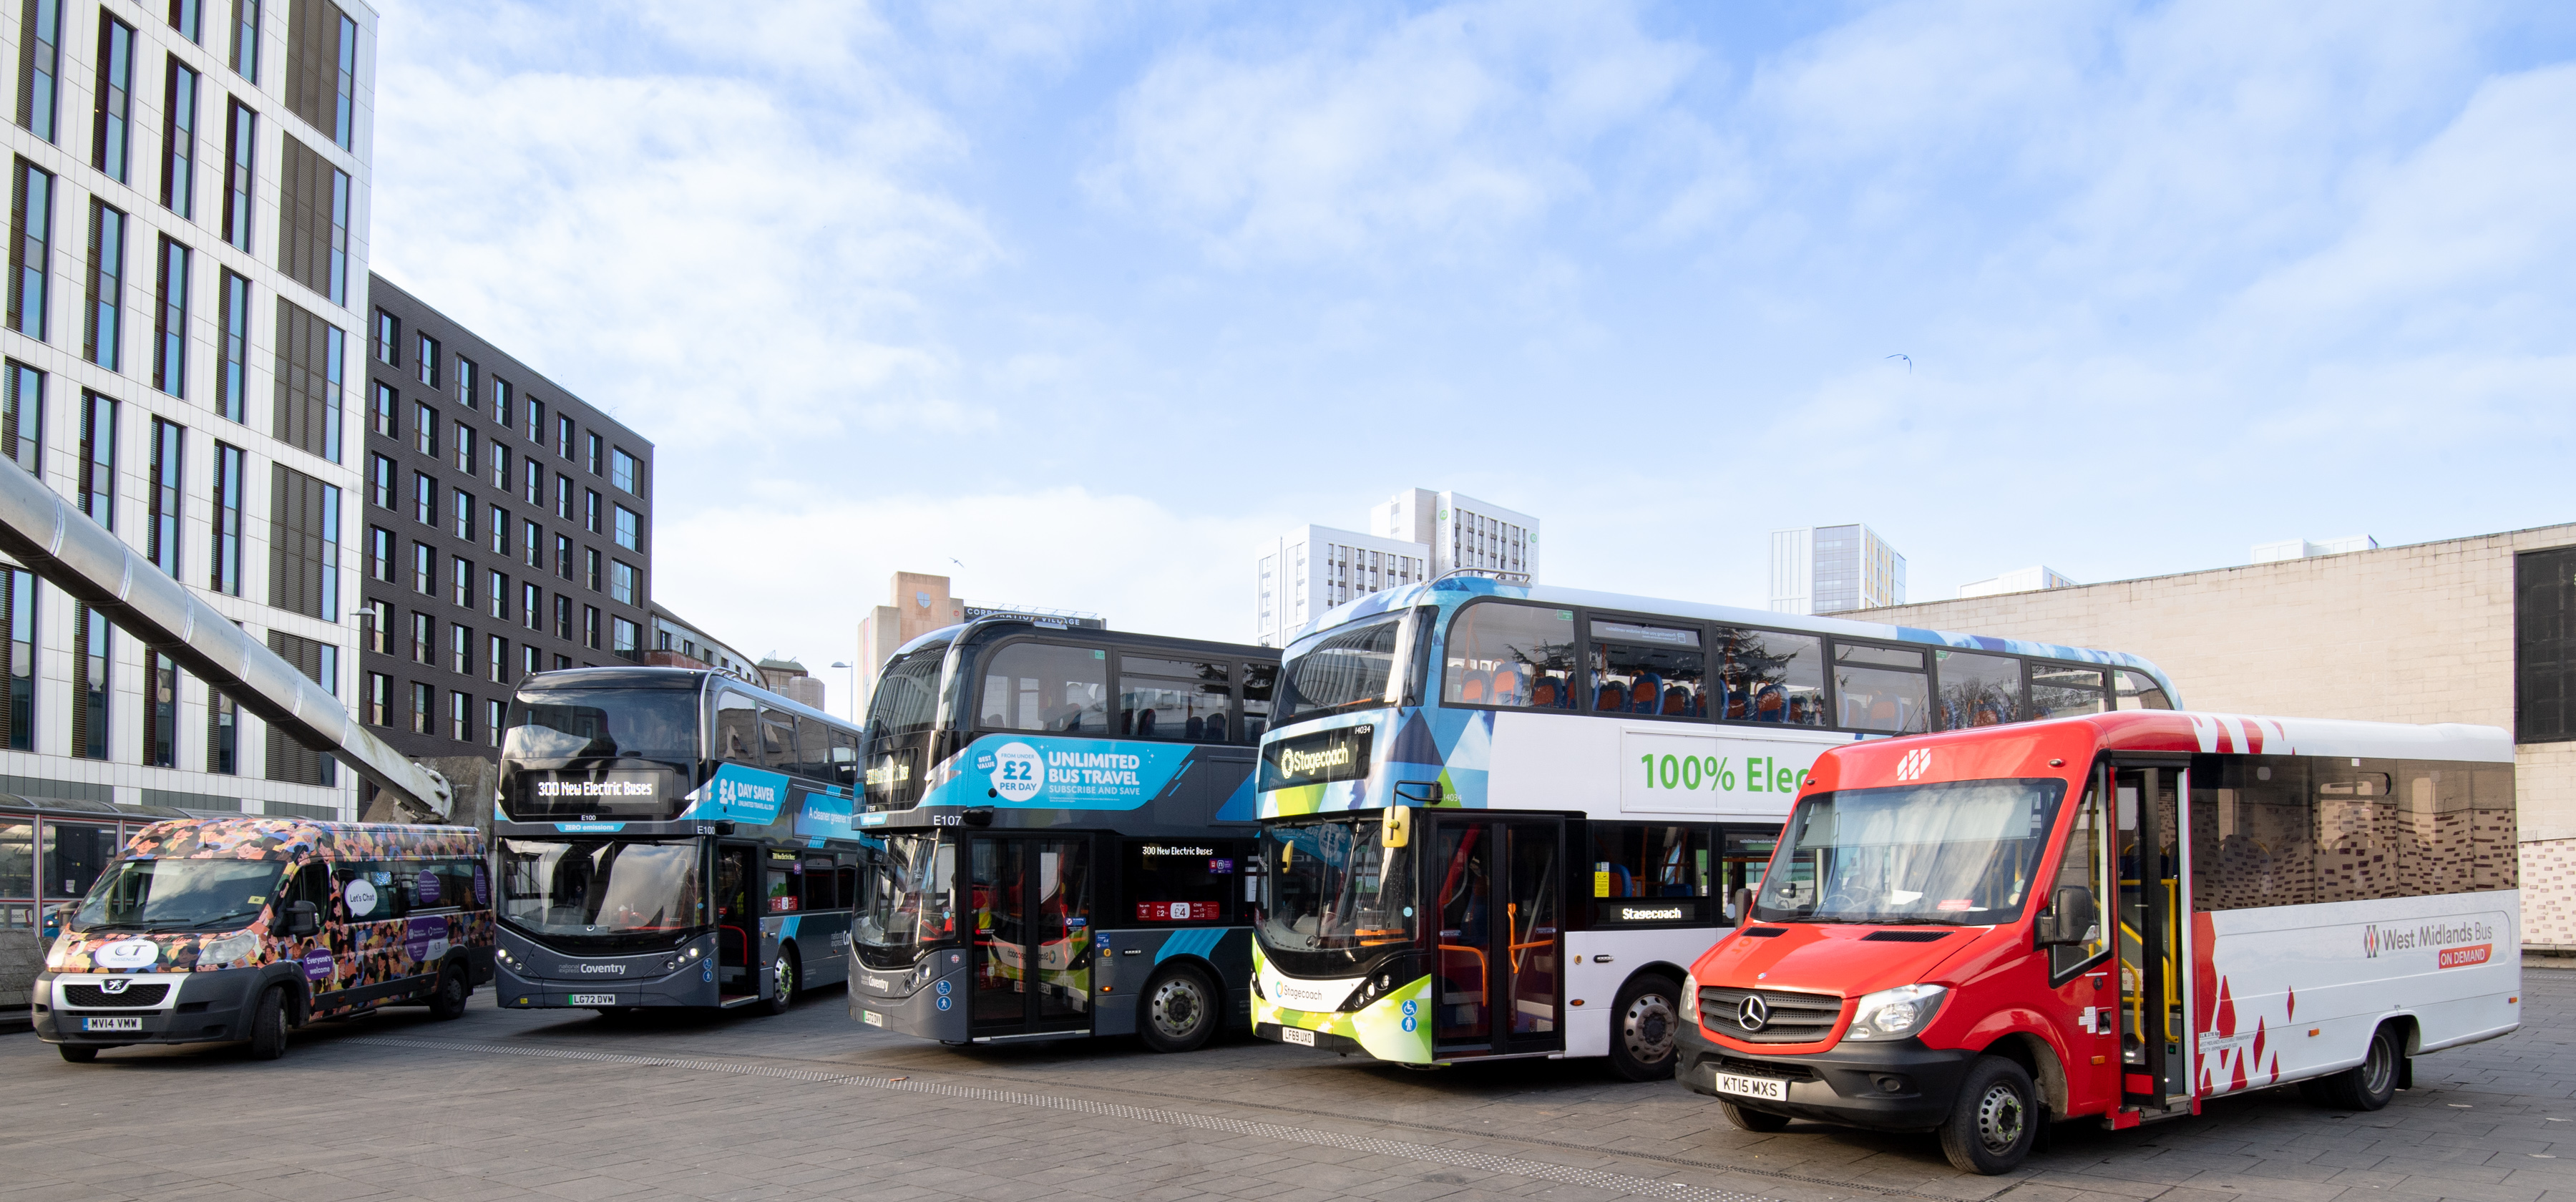 Four buses in Coventry including Stagecoach and National Express branded vehicles